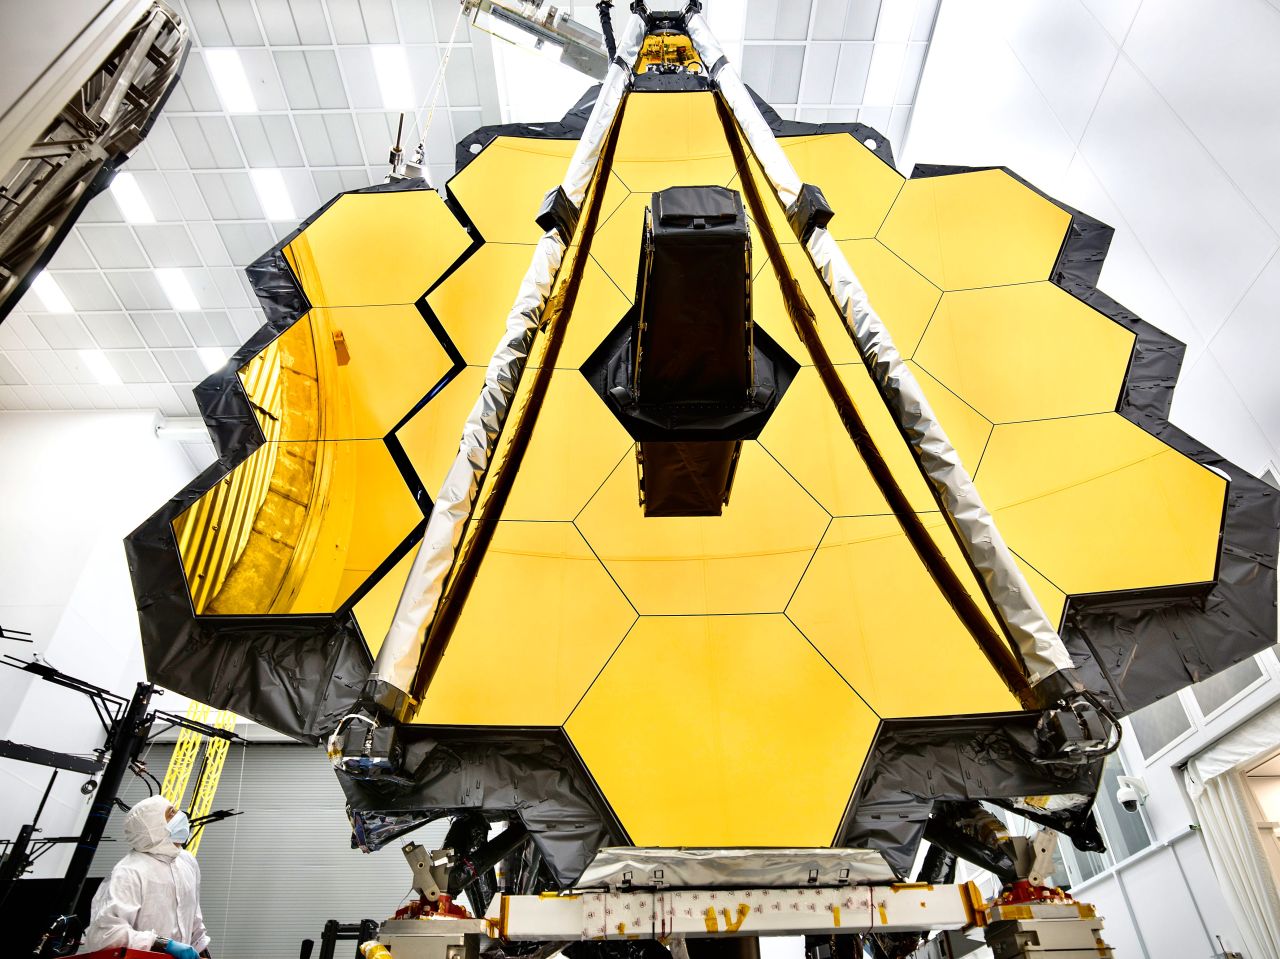 The mirror array will have to be folded to fit into the Ariane 5 rocket that will <a href="https://jwst.nasa.gov/launch.html" target="_blank" target="_blank">launch</a> the Webb into space, departing from the Guiana Space Center in French Guiana (South America).